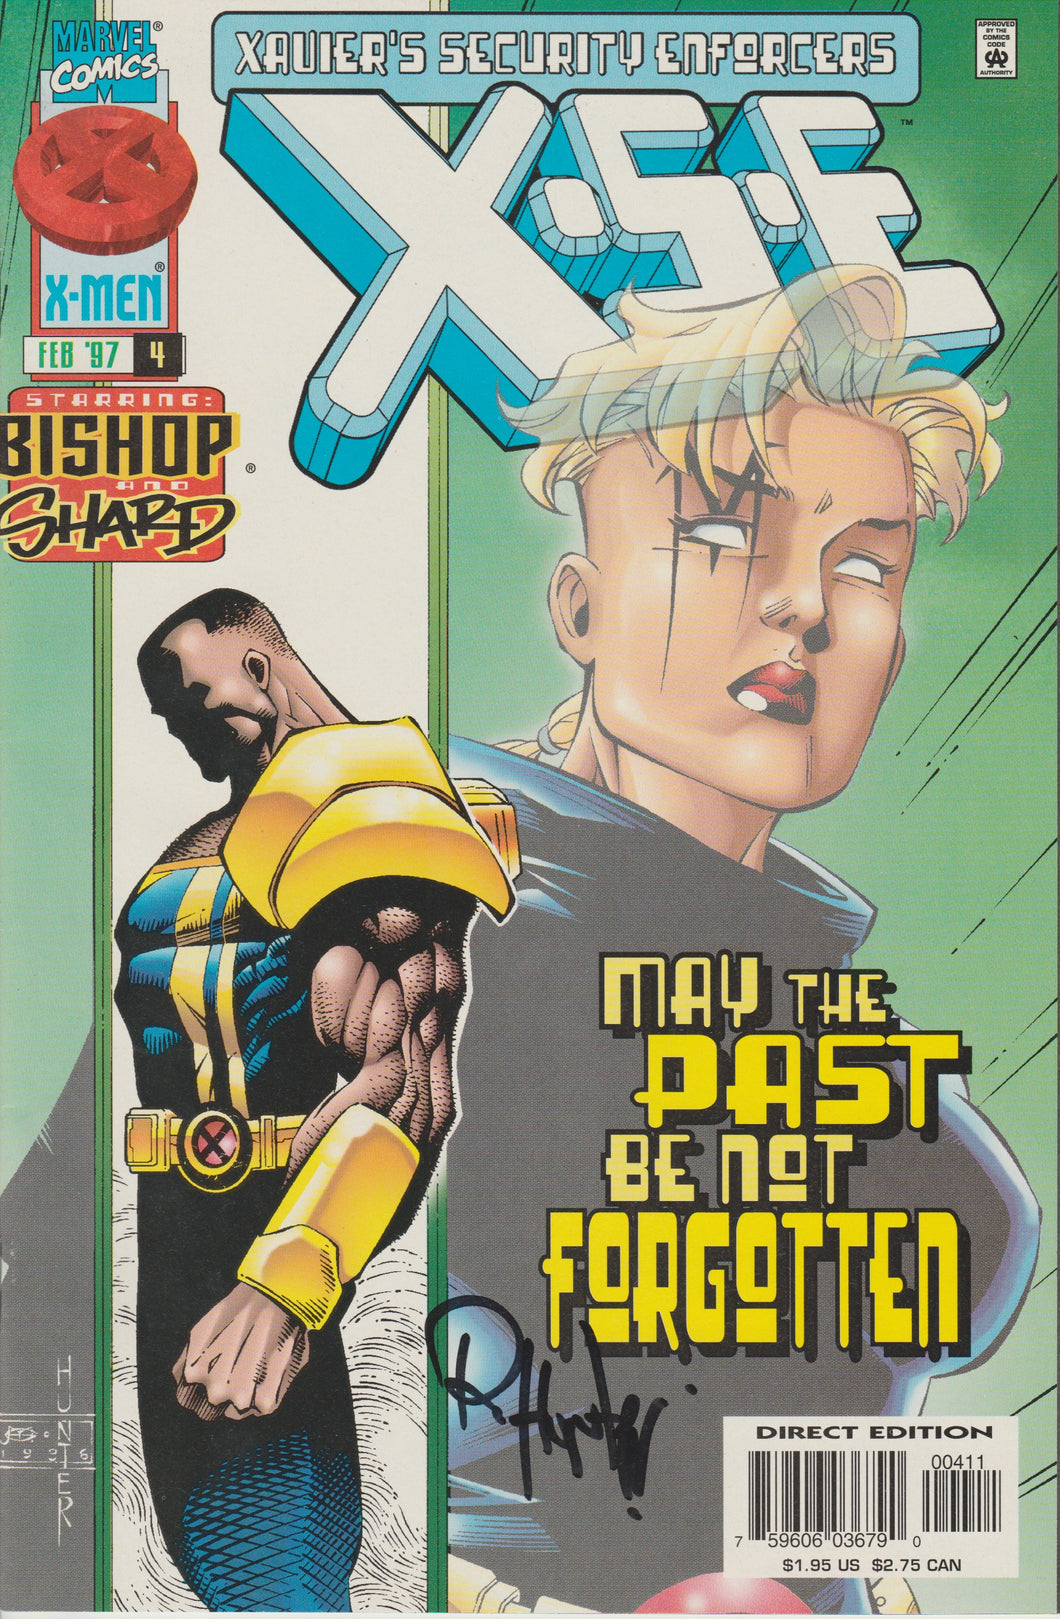 Xavier's Security Enforcers #4 signed by Rob Hunter